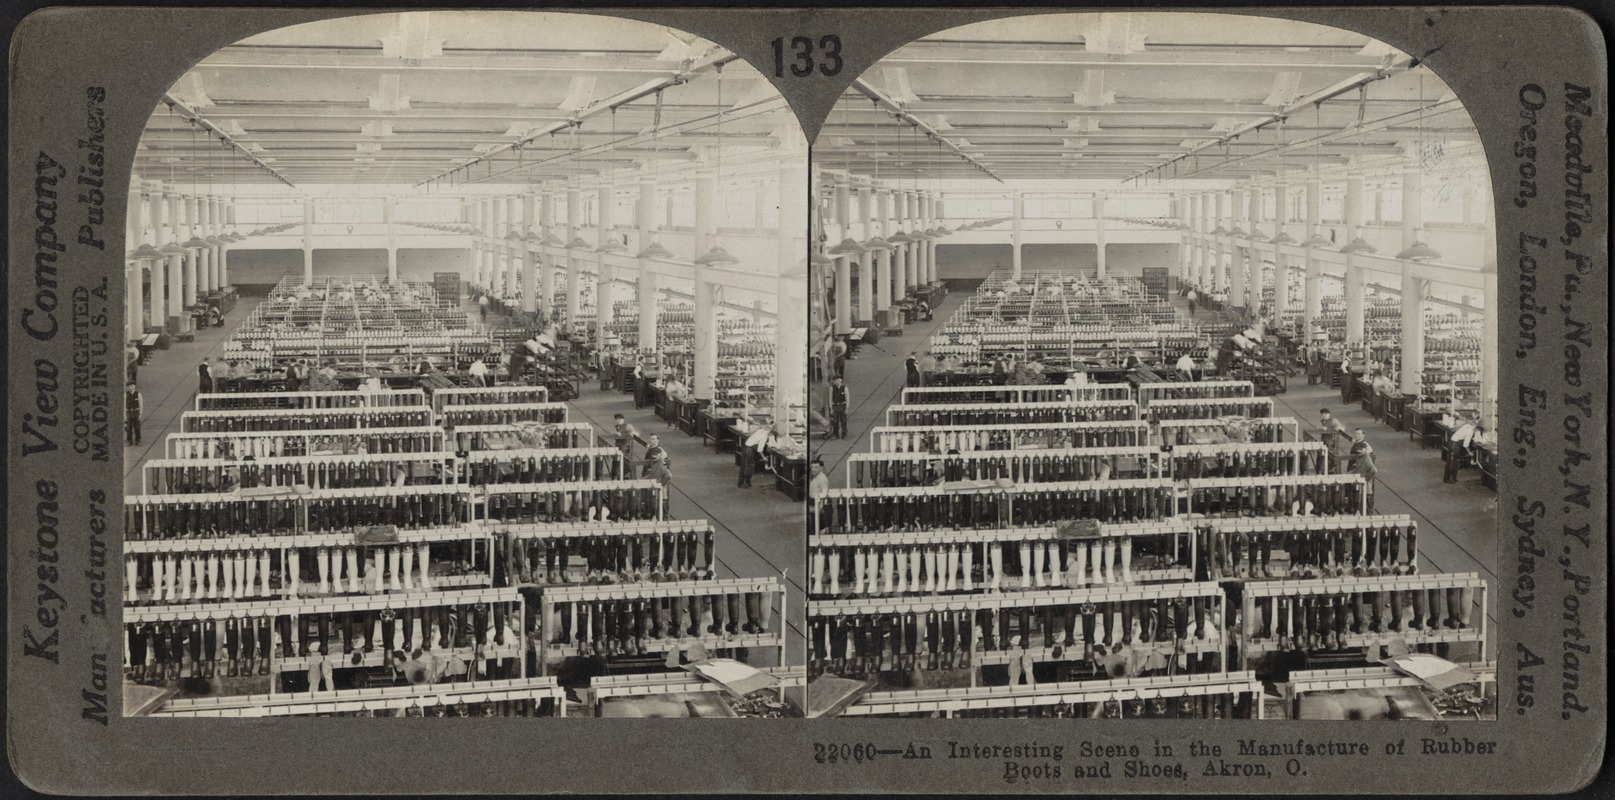 Making rubber boots and shoes, Akron, Ohio